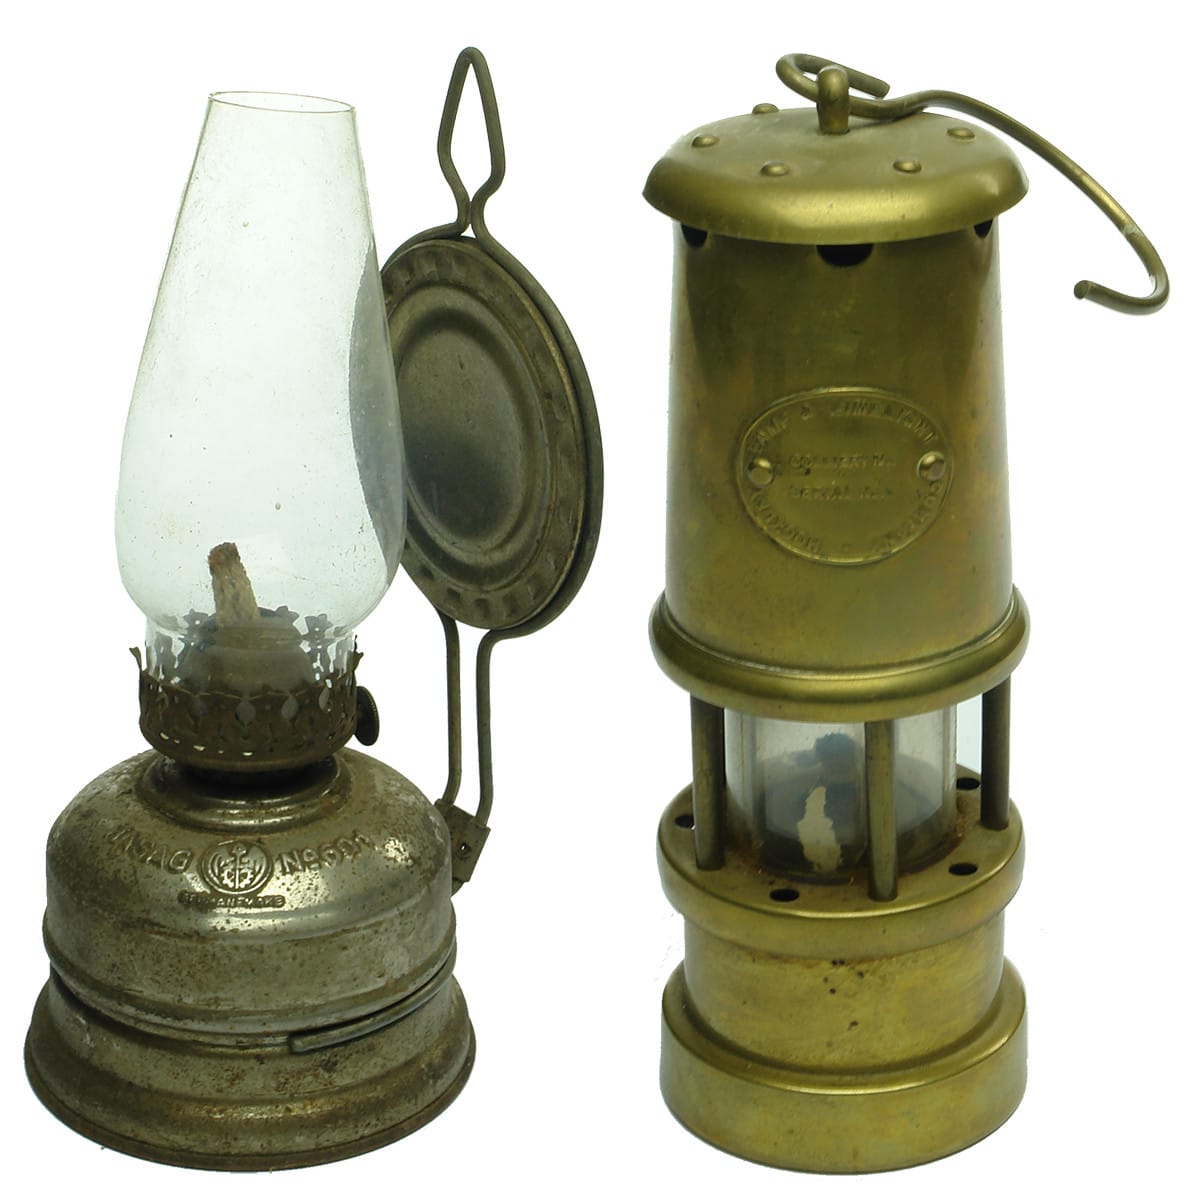 2 Lamps. Small table lamp. Hasag No 601. German Make; Small hanging brass type. Hockley Lamp & Limelight Company.